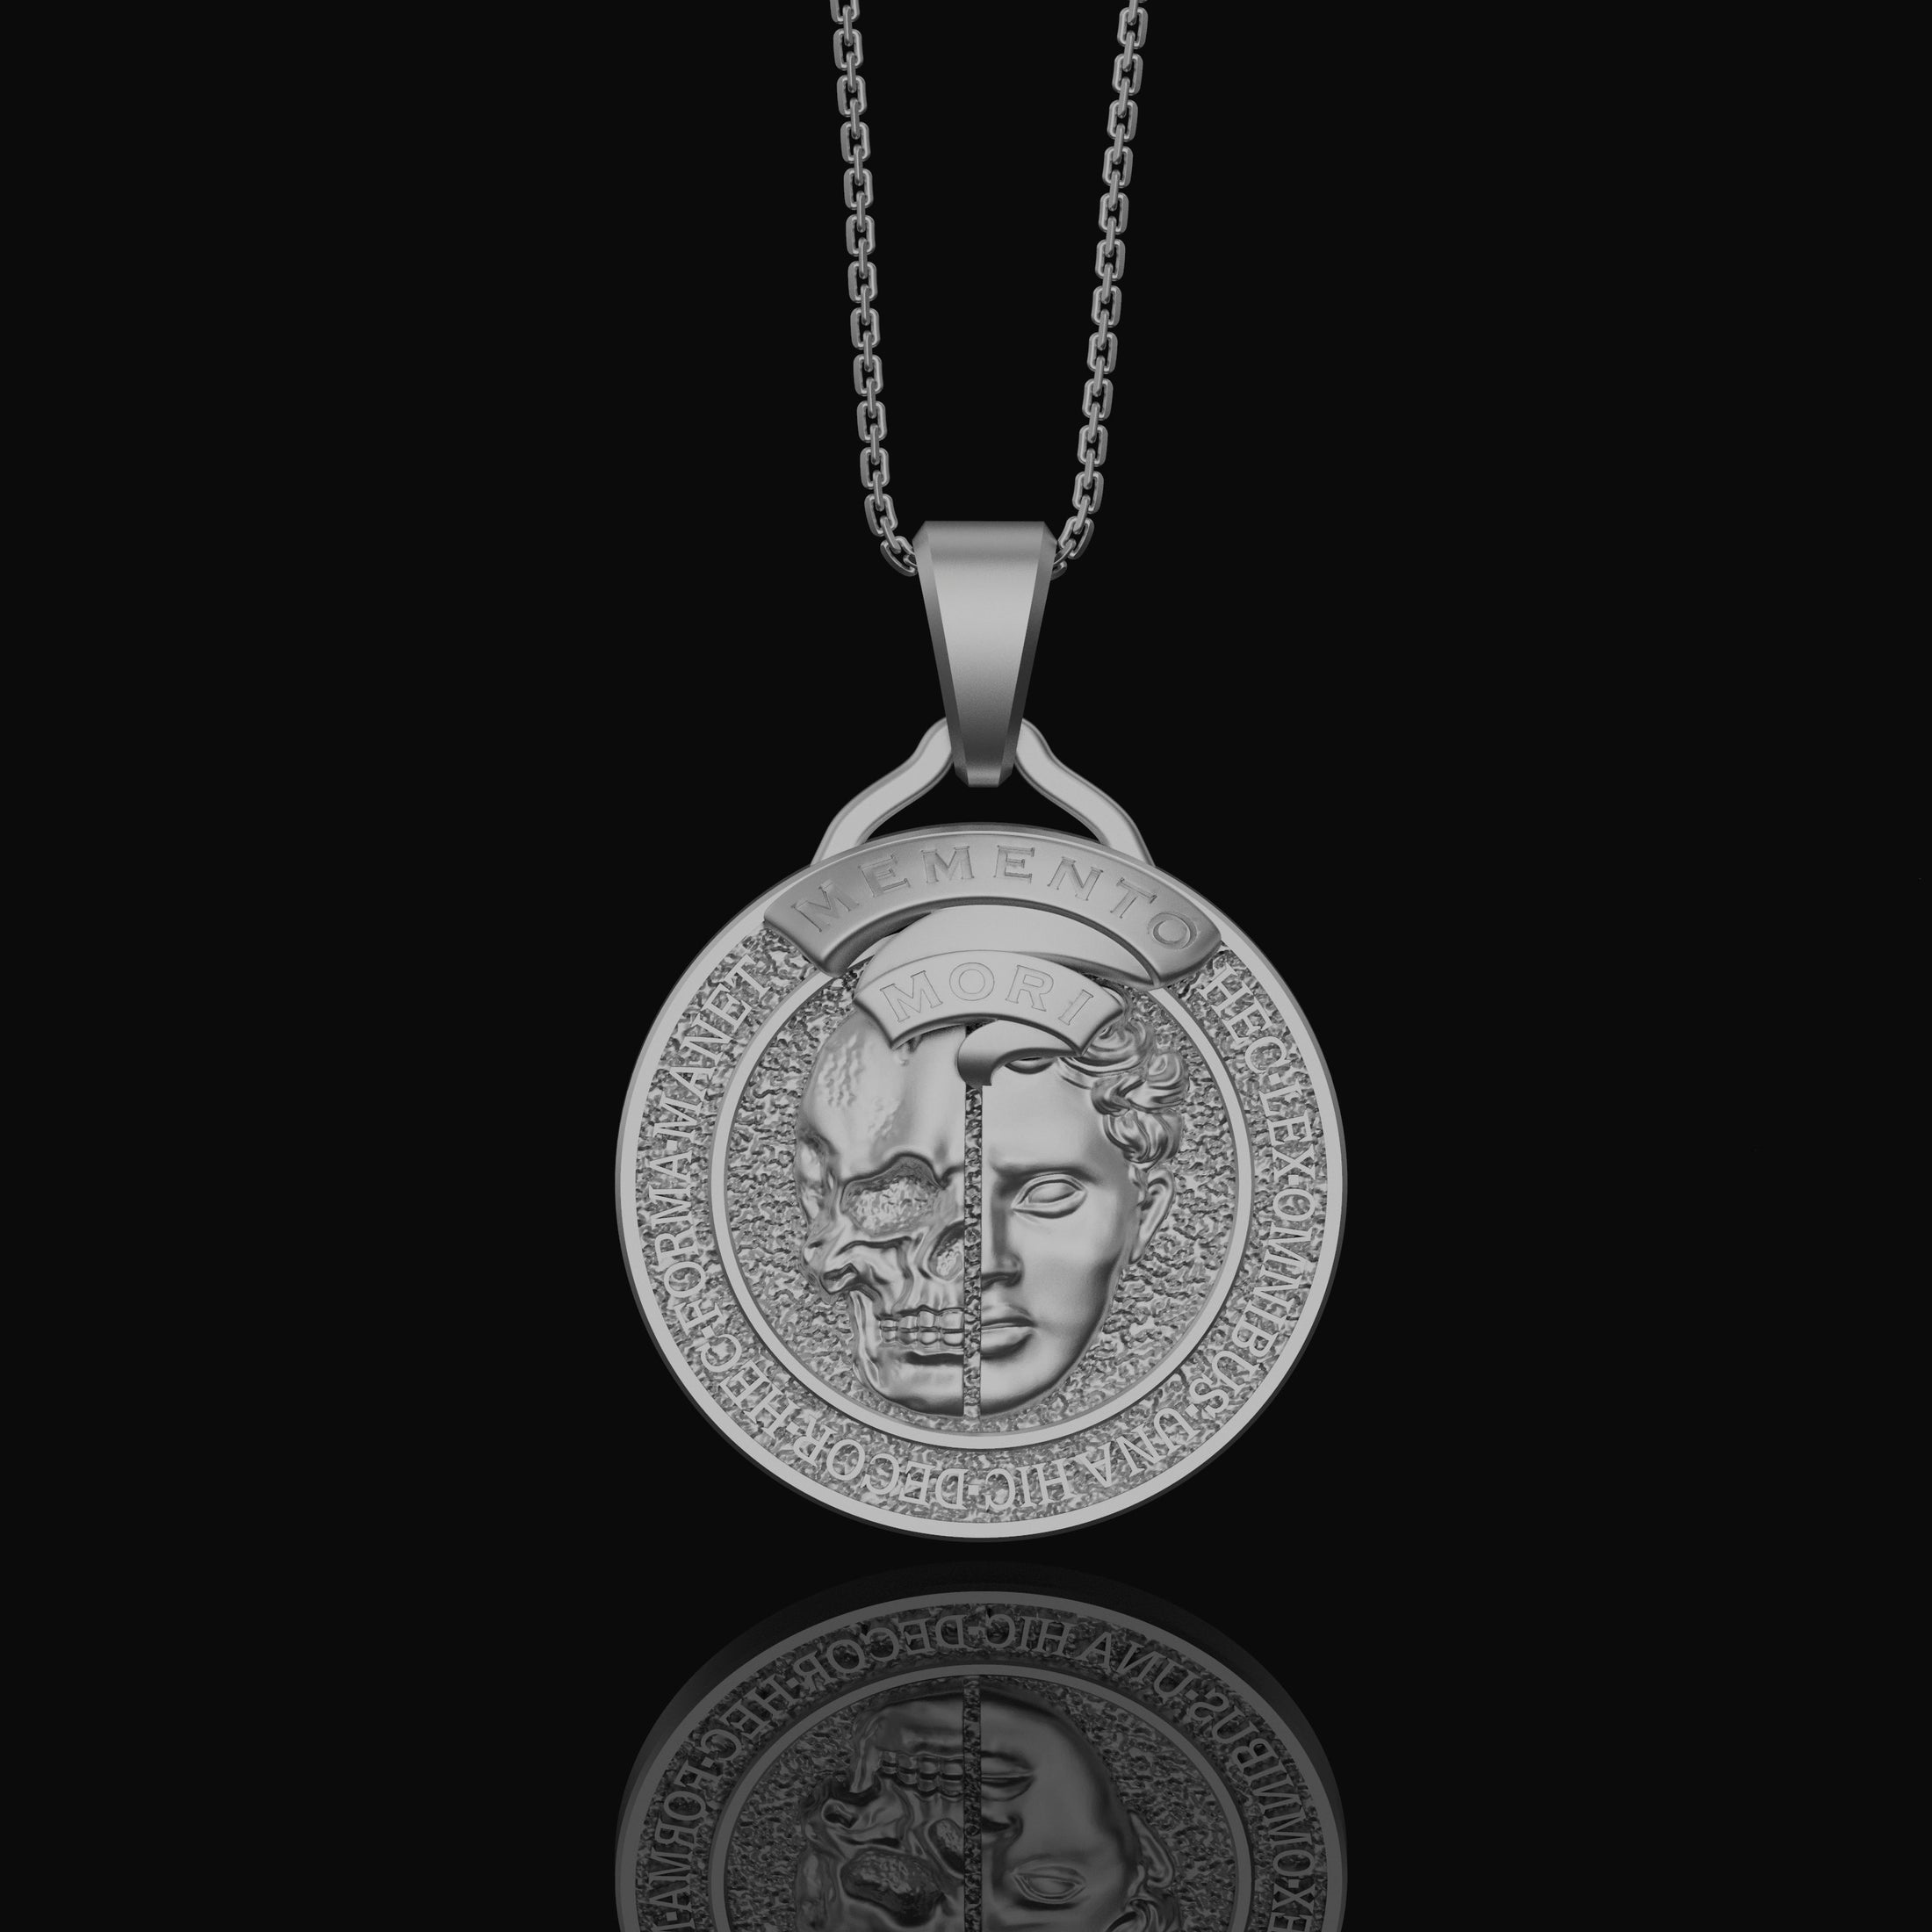 Silver Memento Mori Pendant - Reminder of Mortality Necklace, Philosophical Jewelry, Thoughtful Gift, Birthday Gift